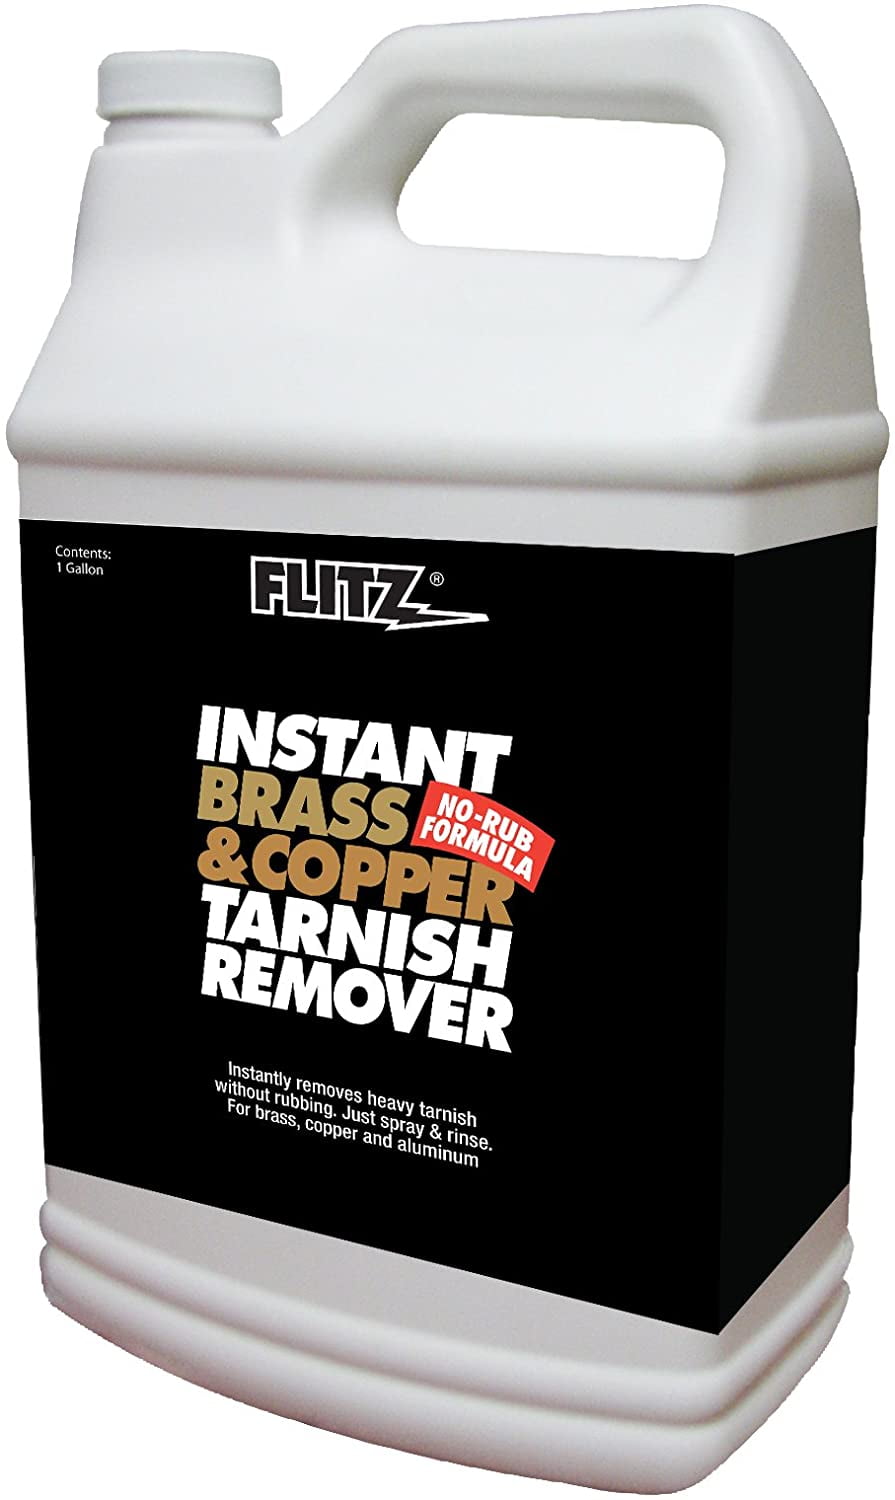  Flitz BC 01806 Instant Brass and Copper Tarnish Remover 16 oz  Spray Cleaner + 16 oz Metal Polish Paste Cream + EXTRA LARGE Microfiber  Cloth Shine Away Corrosion : Health & Household